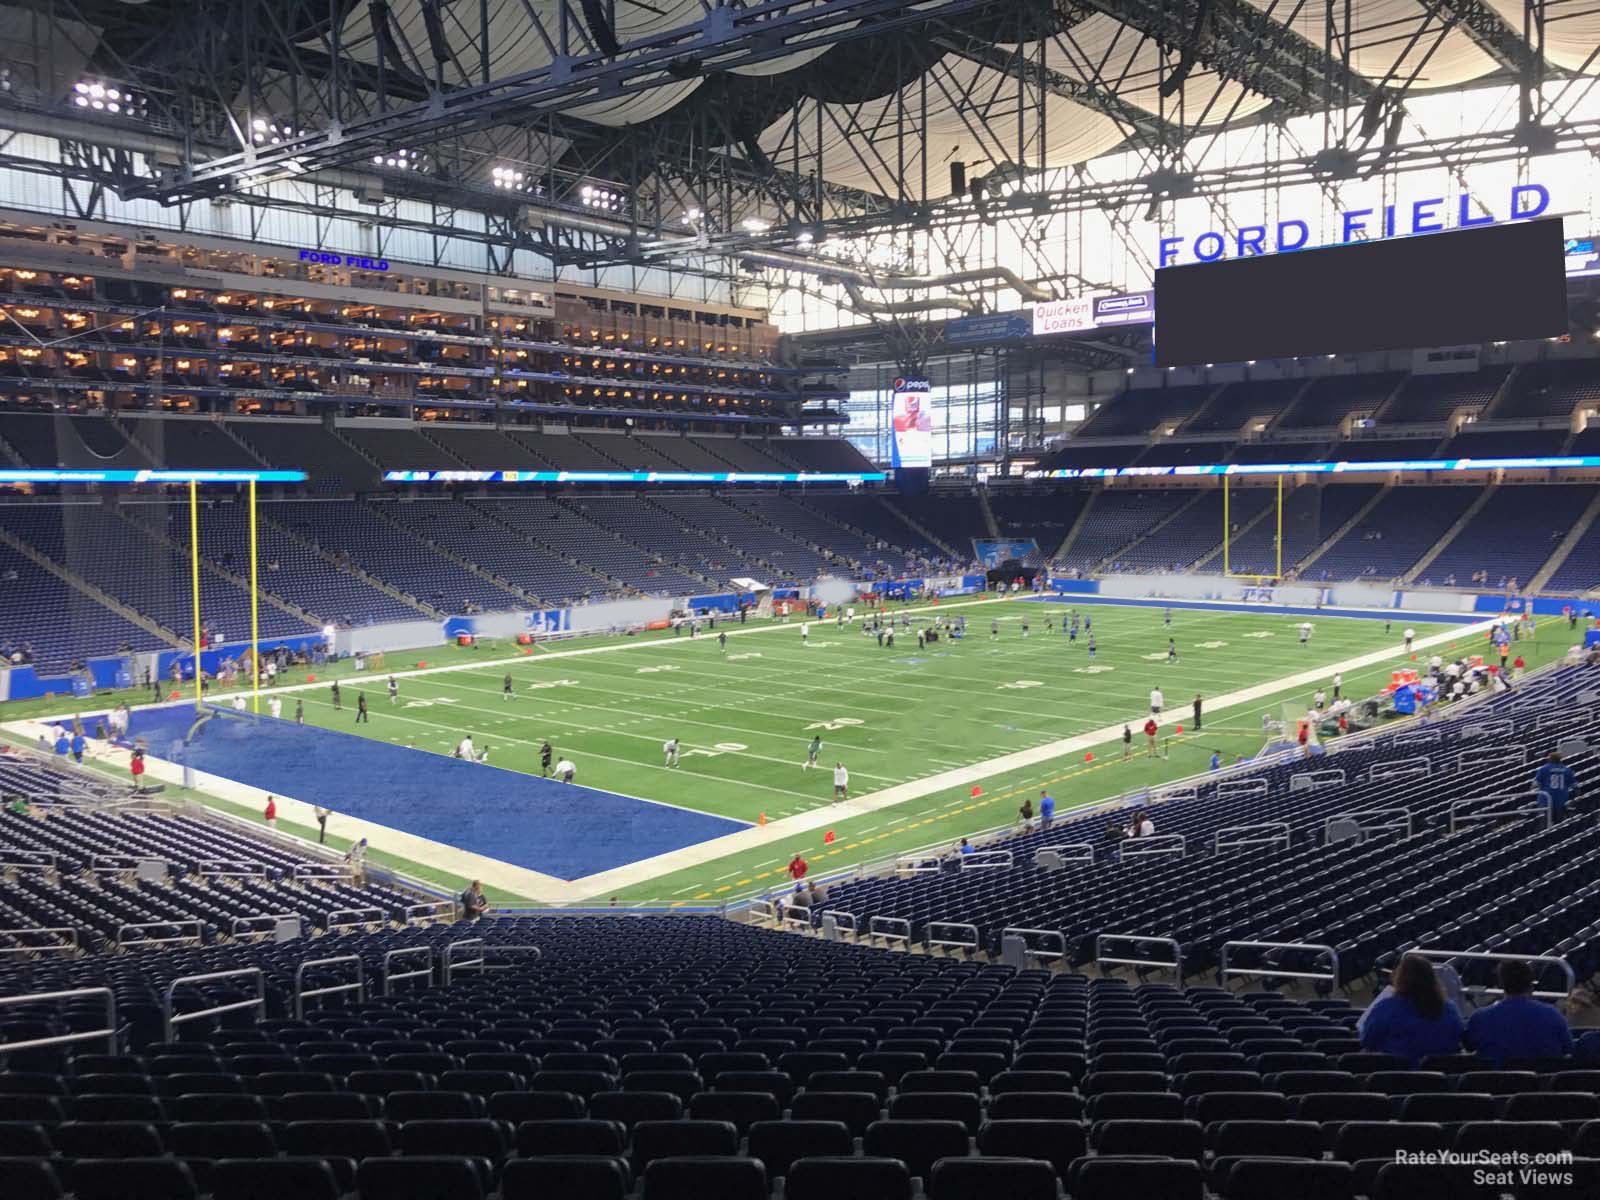 section 121, row 33 seat view  for football - ford field